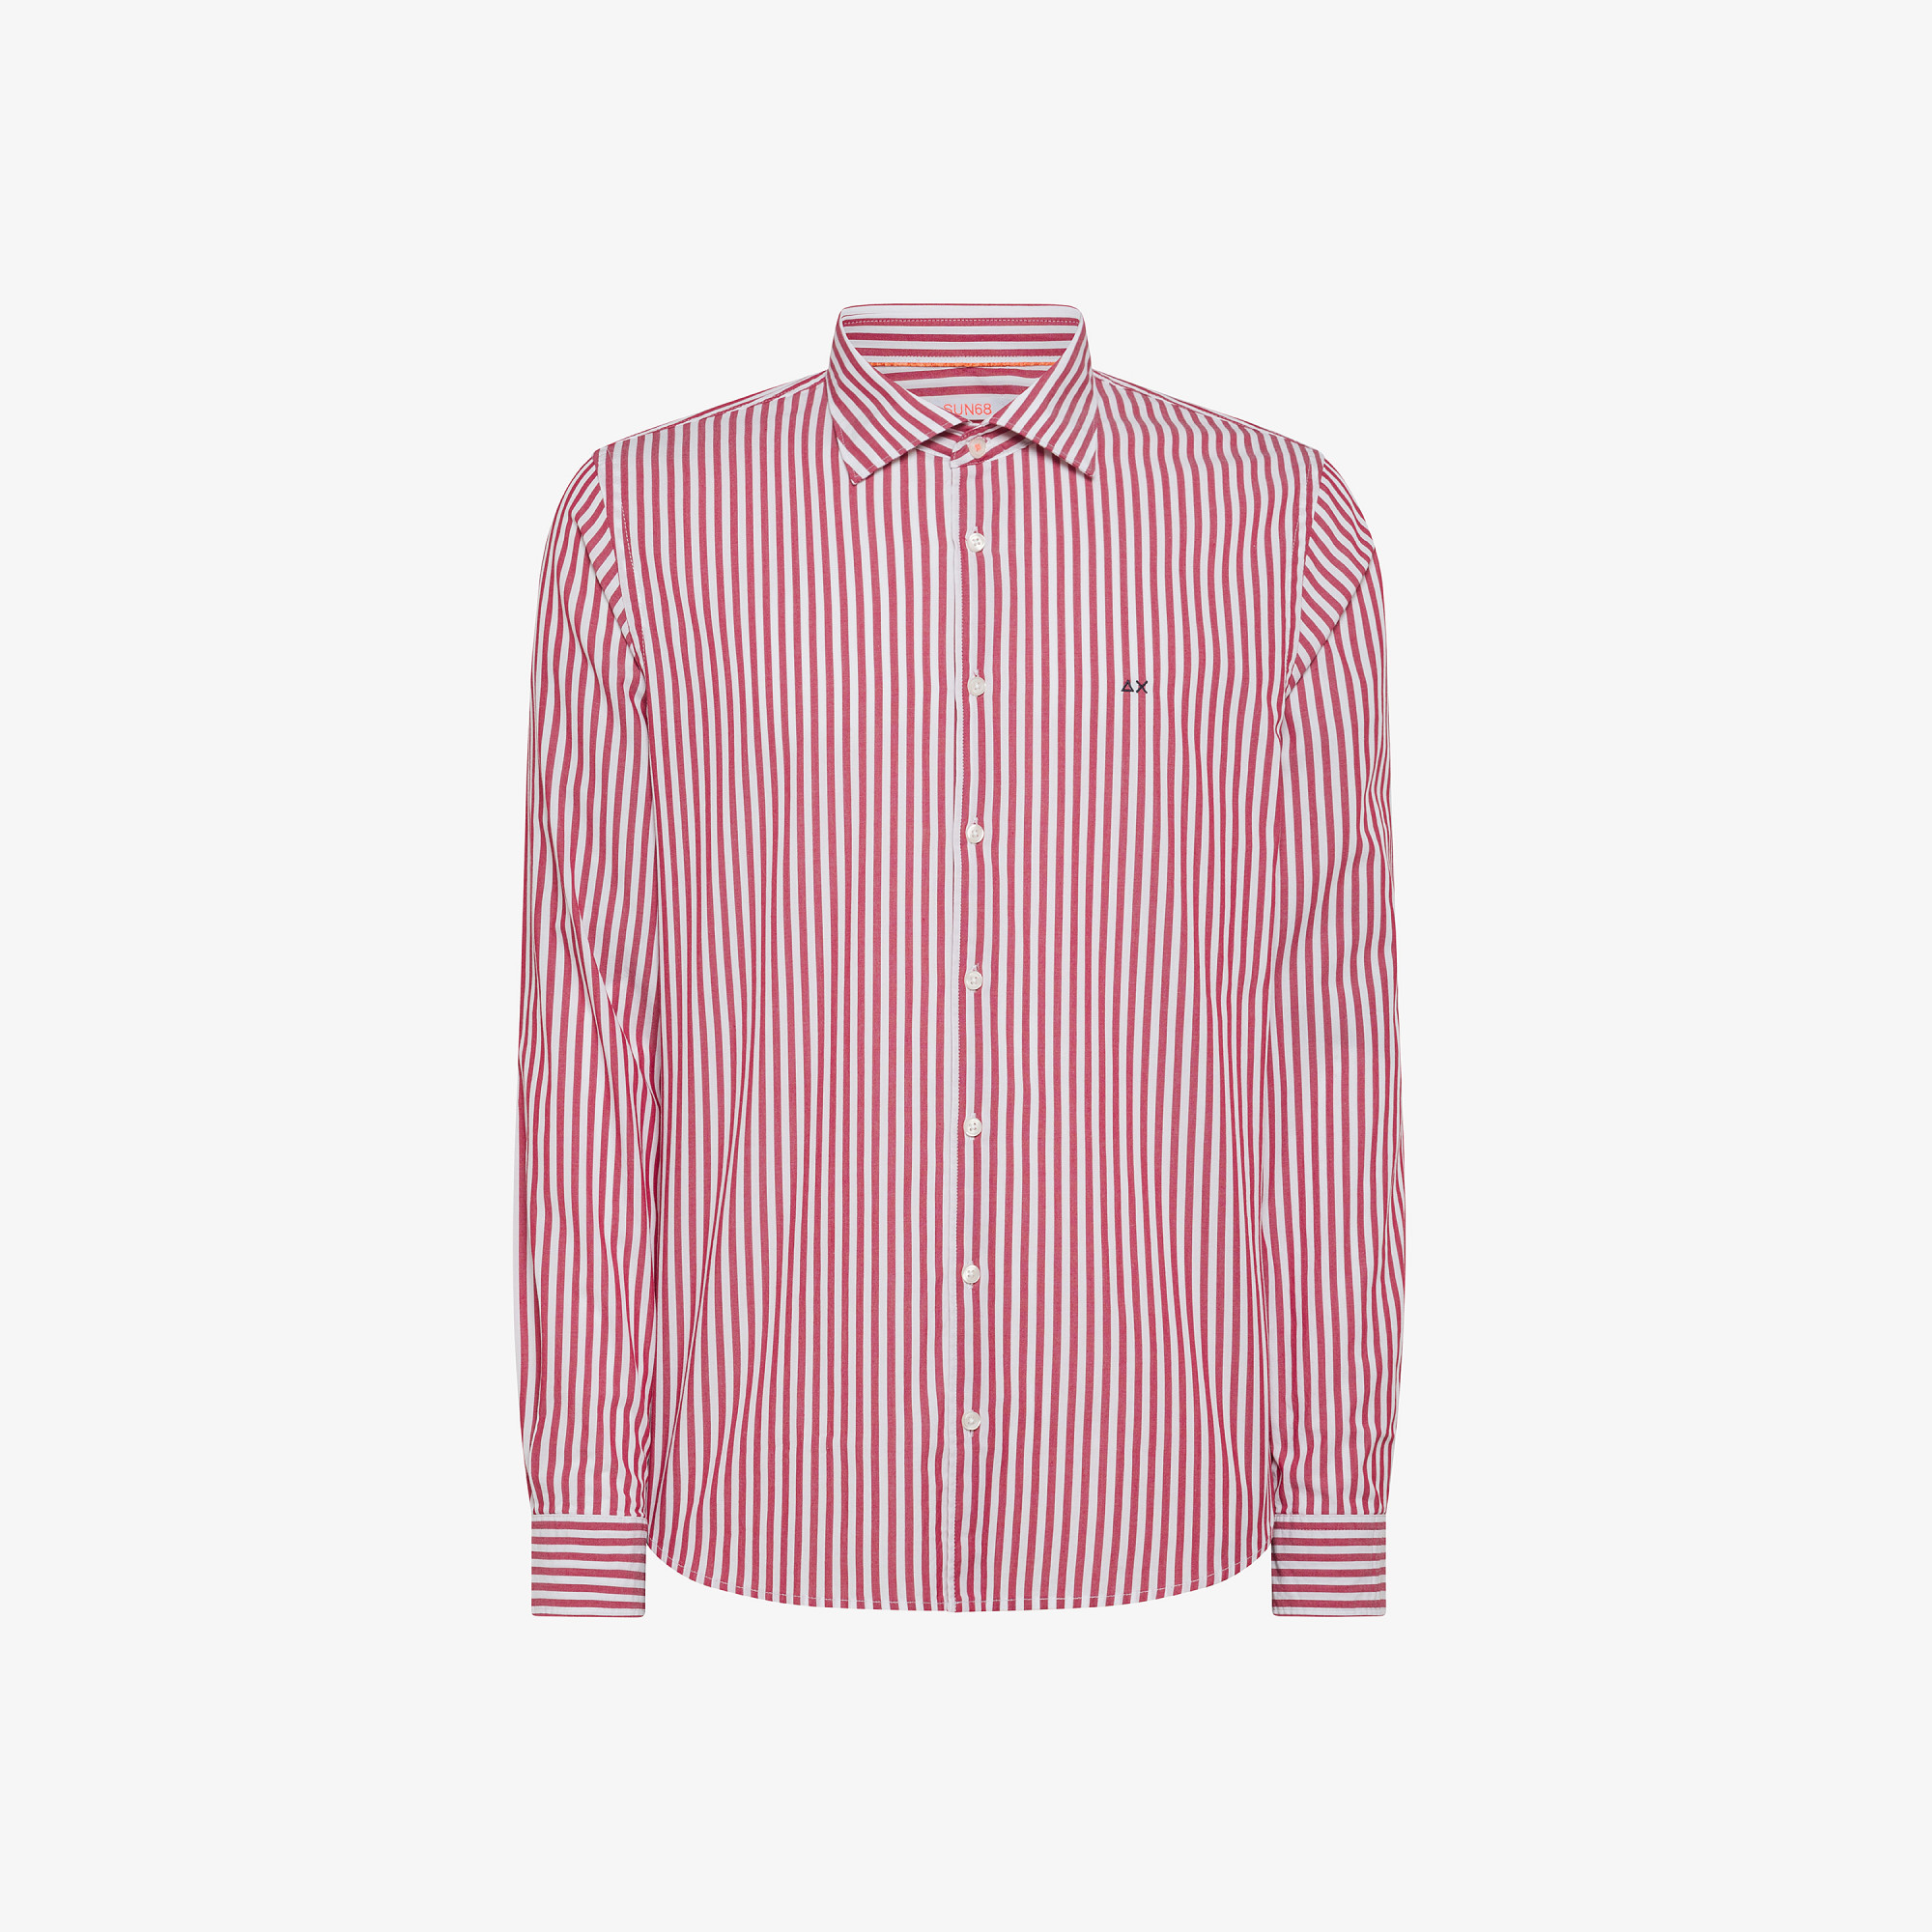 SHIRT CLASSIC STRIPE WITH FLUO DETAIL L/S WHITE/RED